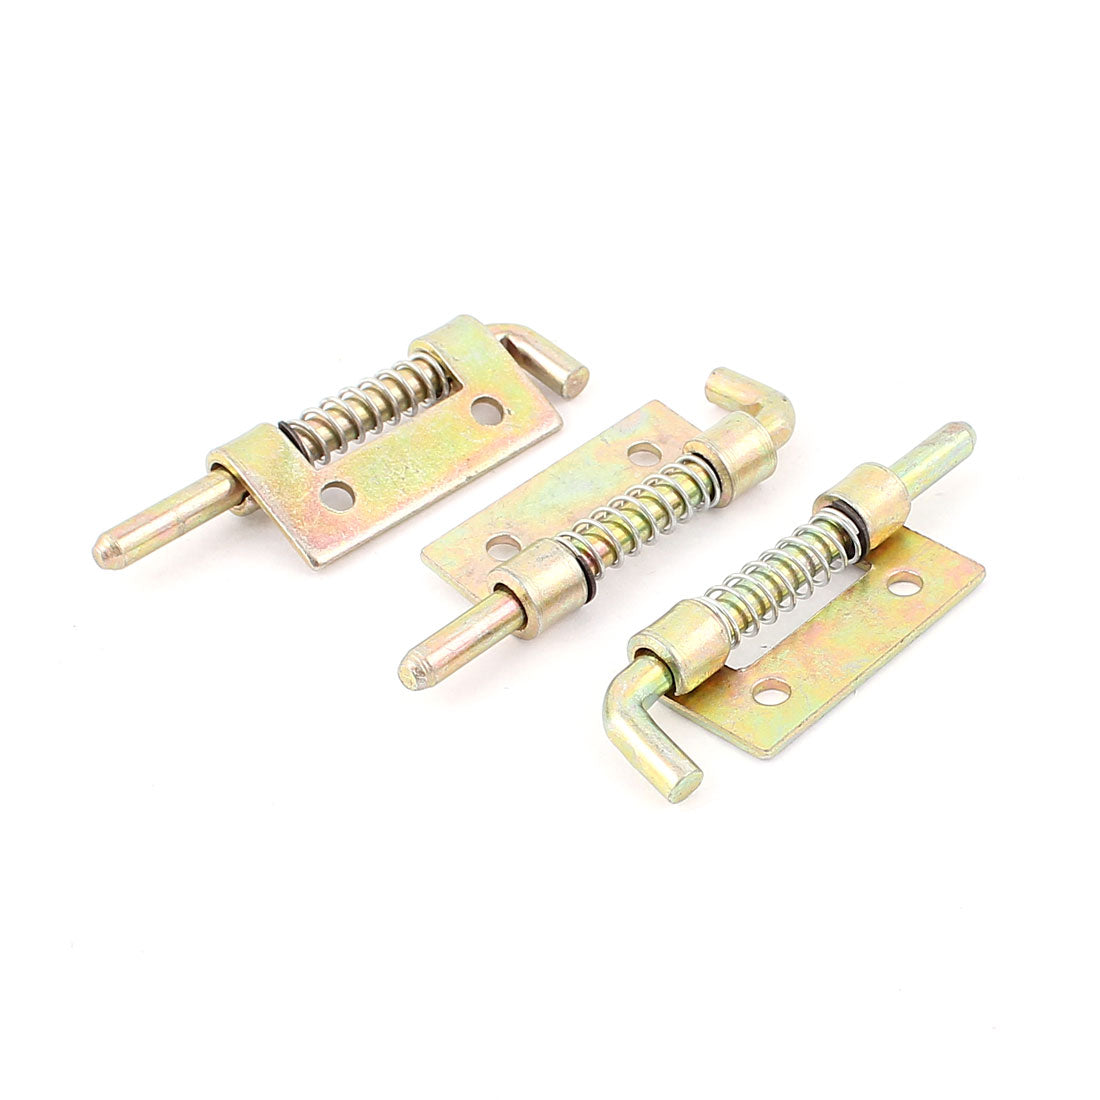 uxcell Uxcell 3pcs Mini Right-handed Door Window Spring Loaded Lock Barrel Bolt Latch Catch